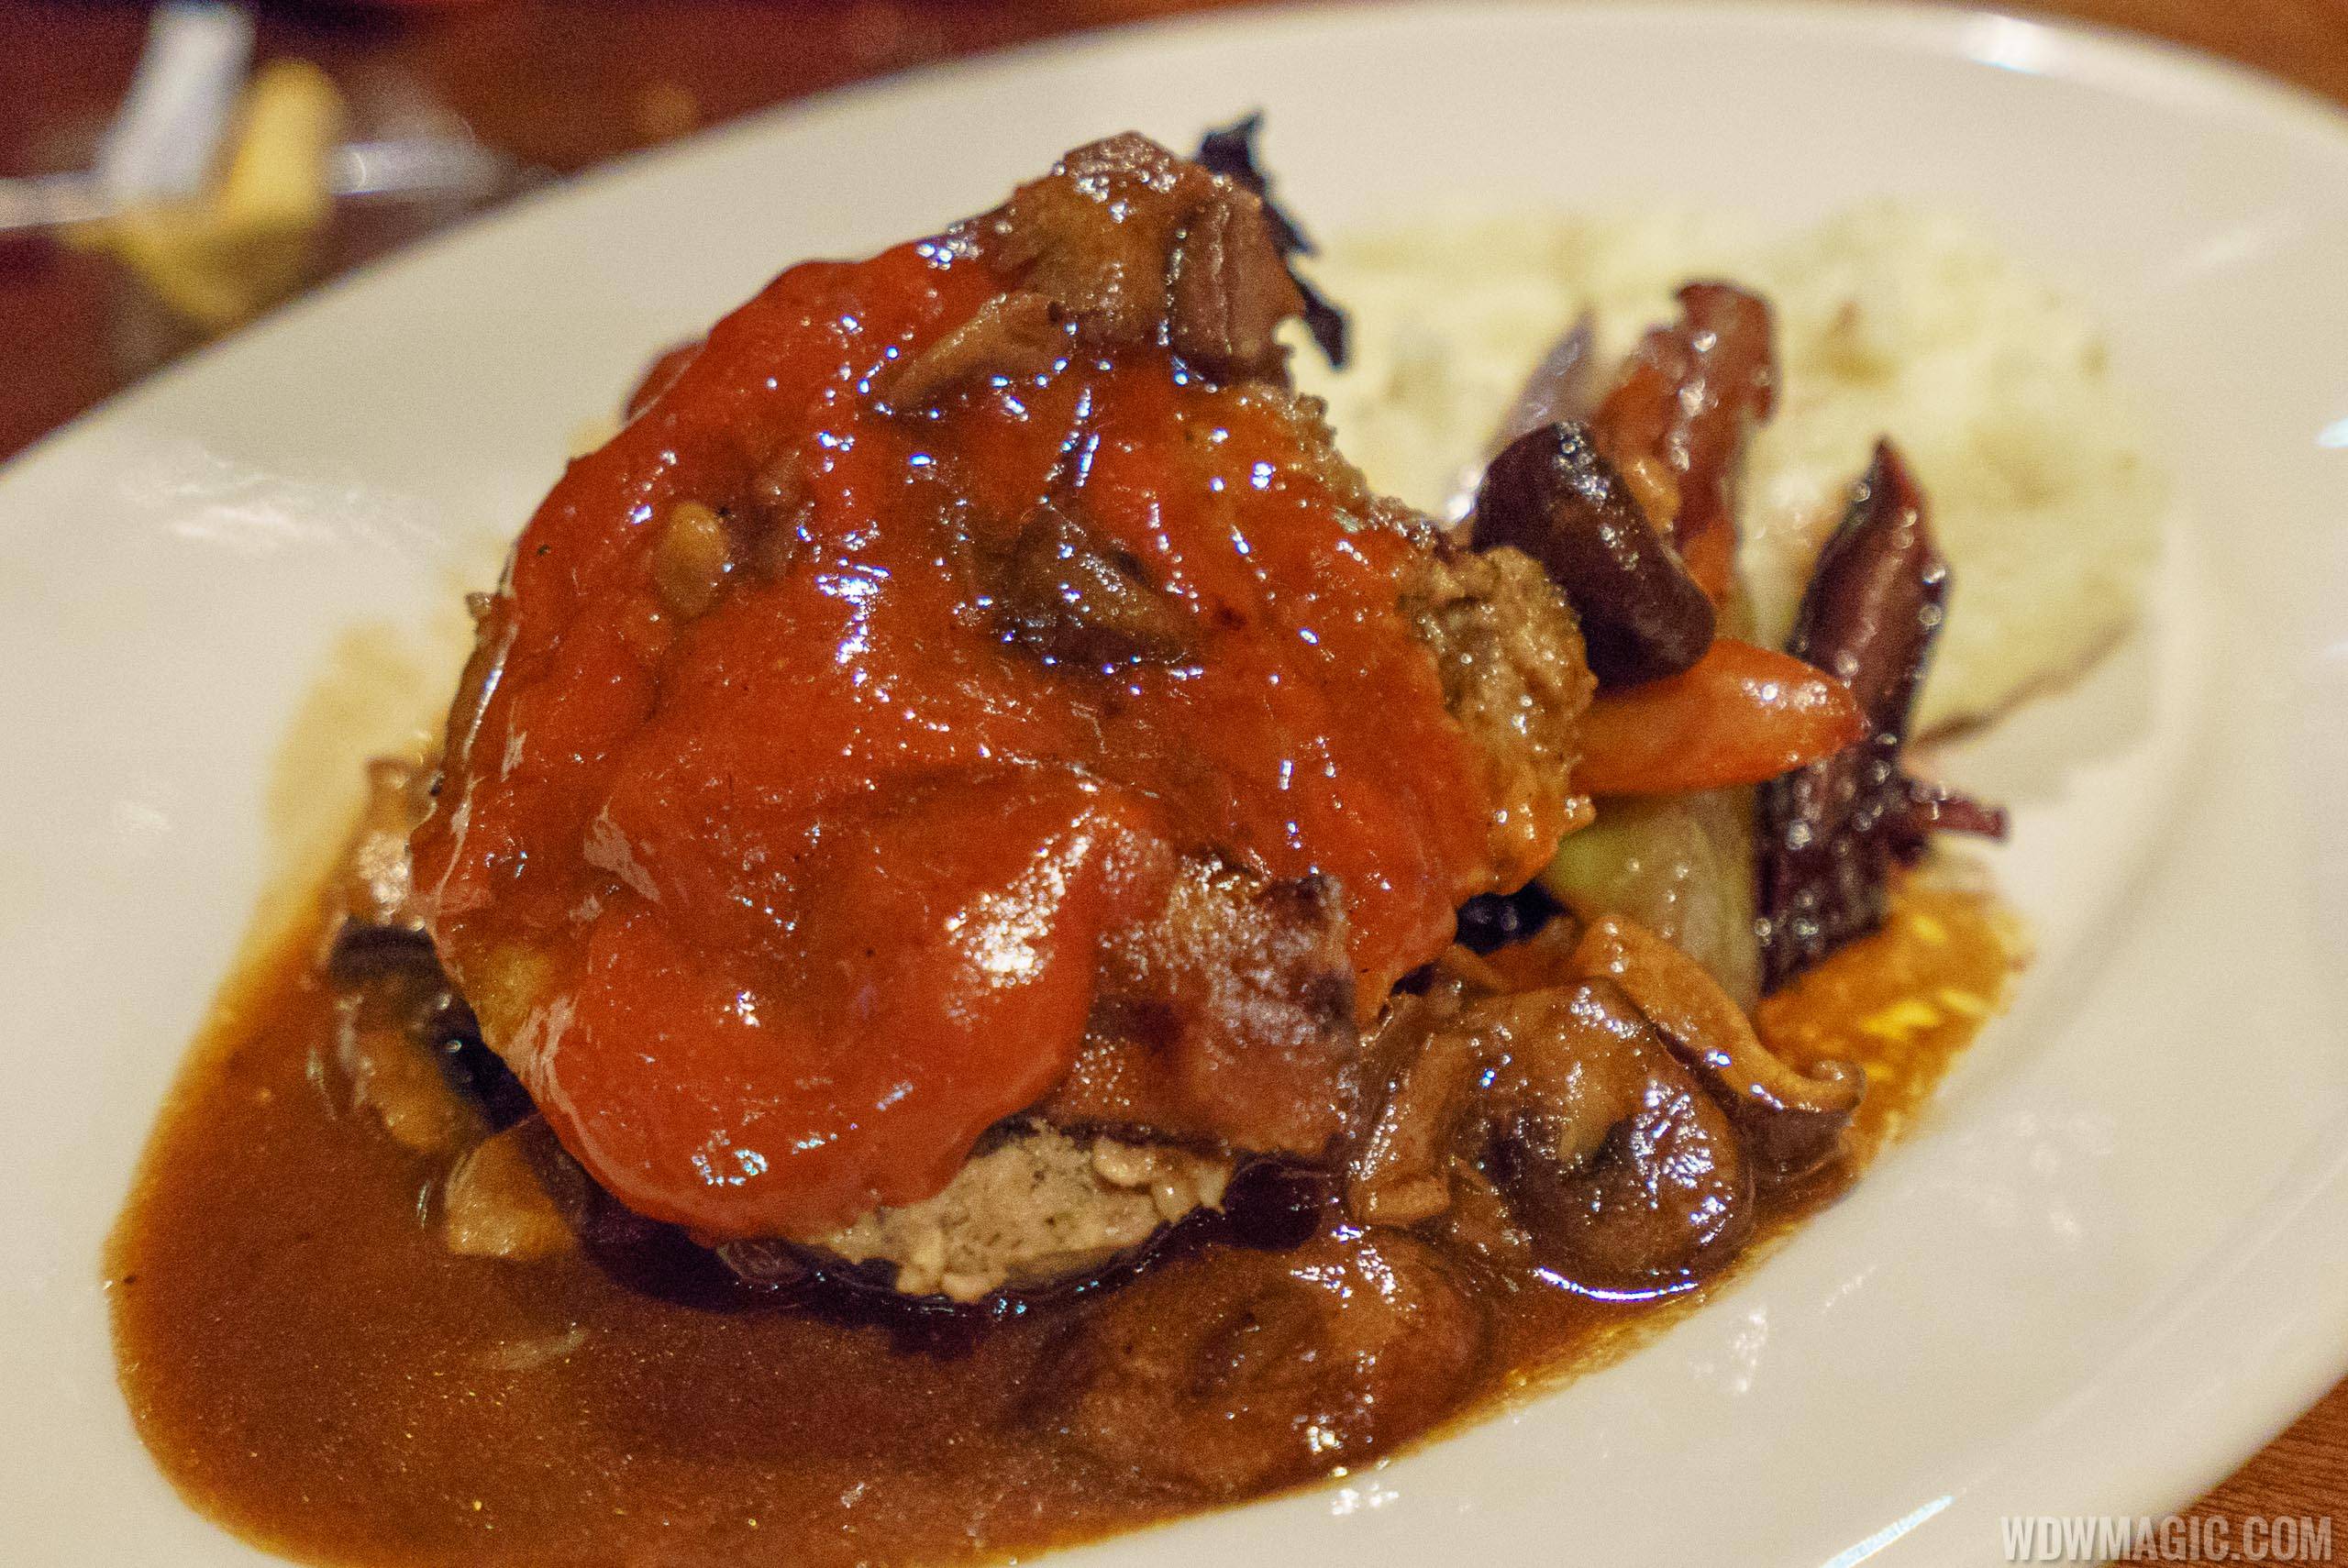 The Edison - Old Fashioned Meatloaf and Gravy